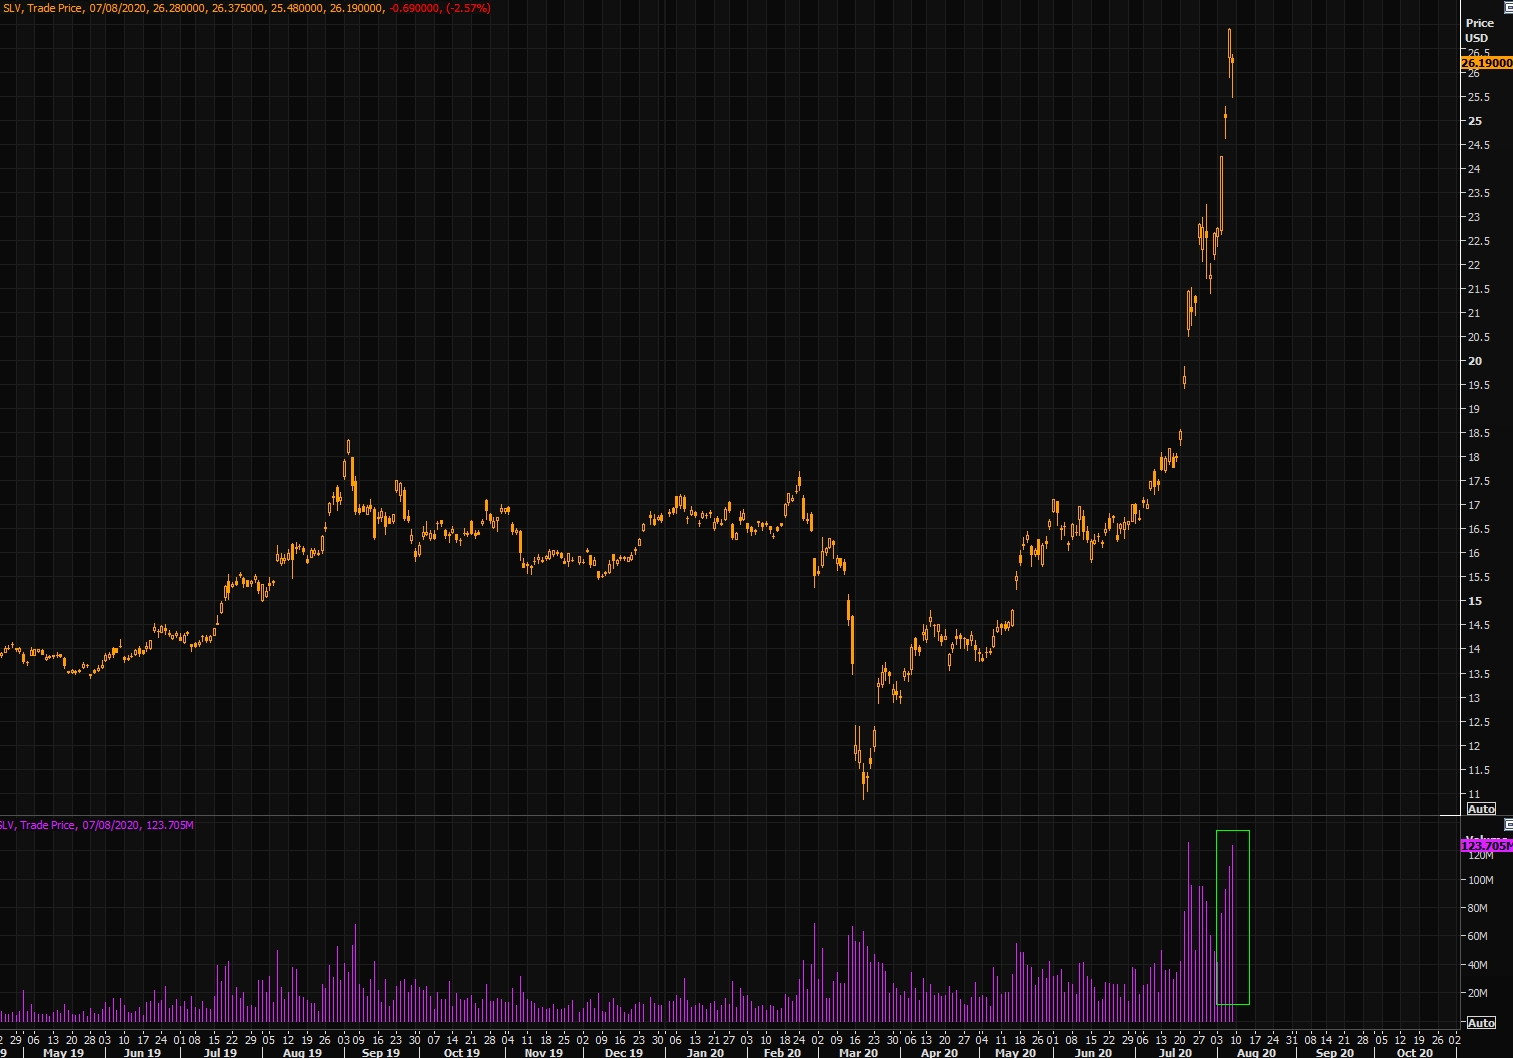 Some serious volumes in SLV...+140% from March lows